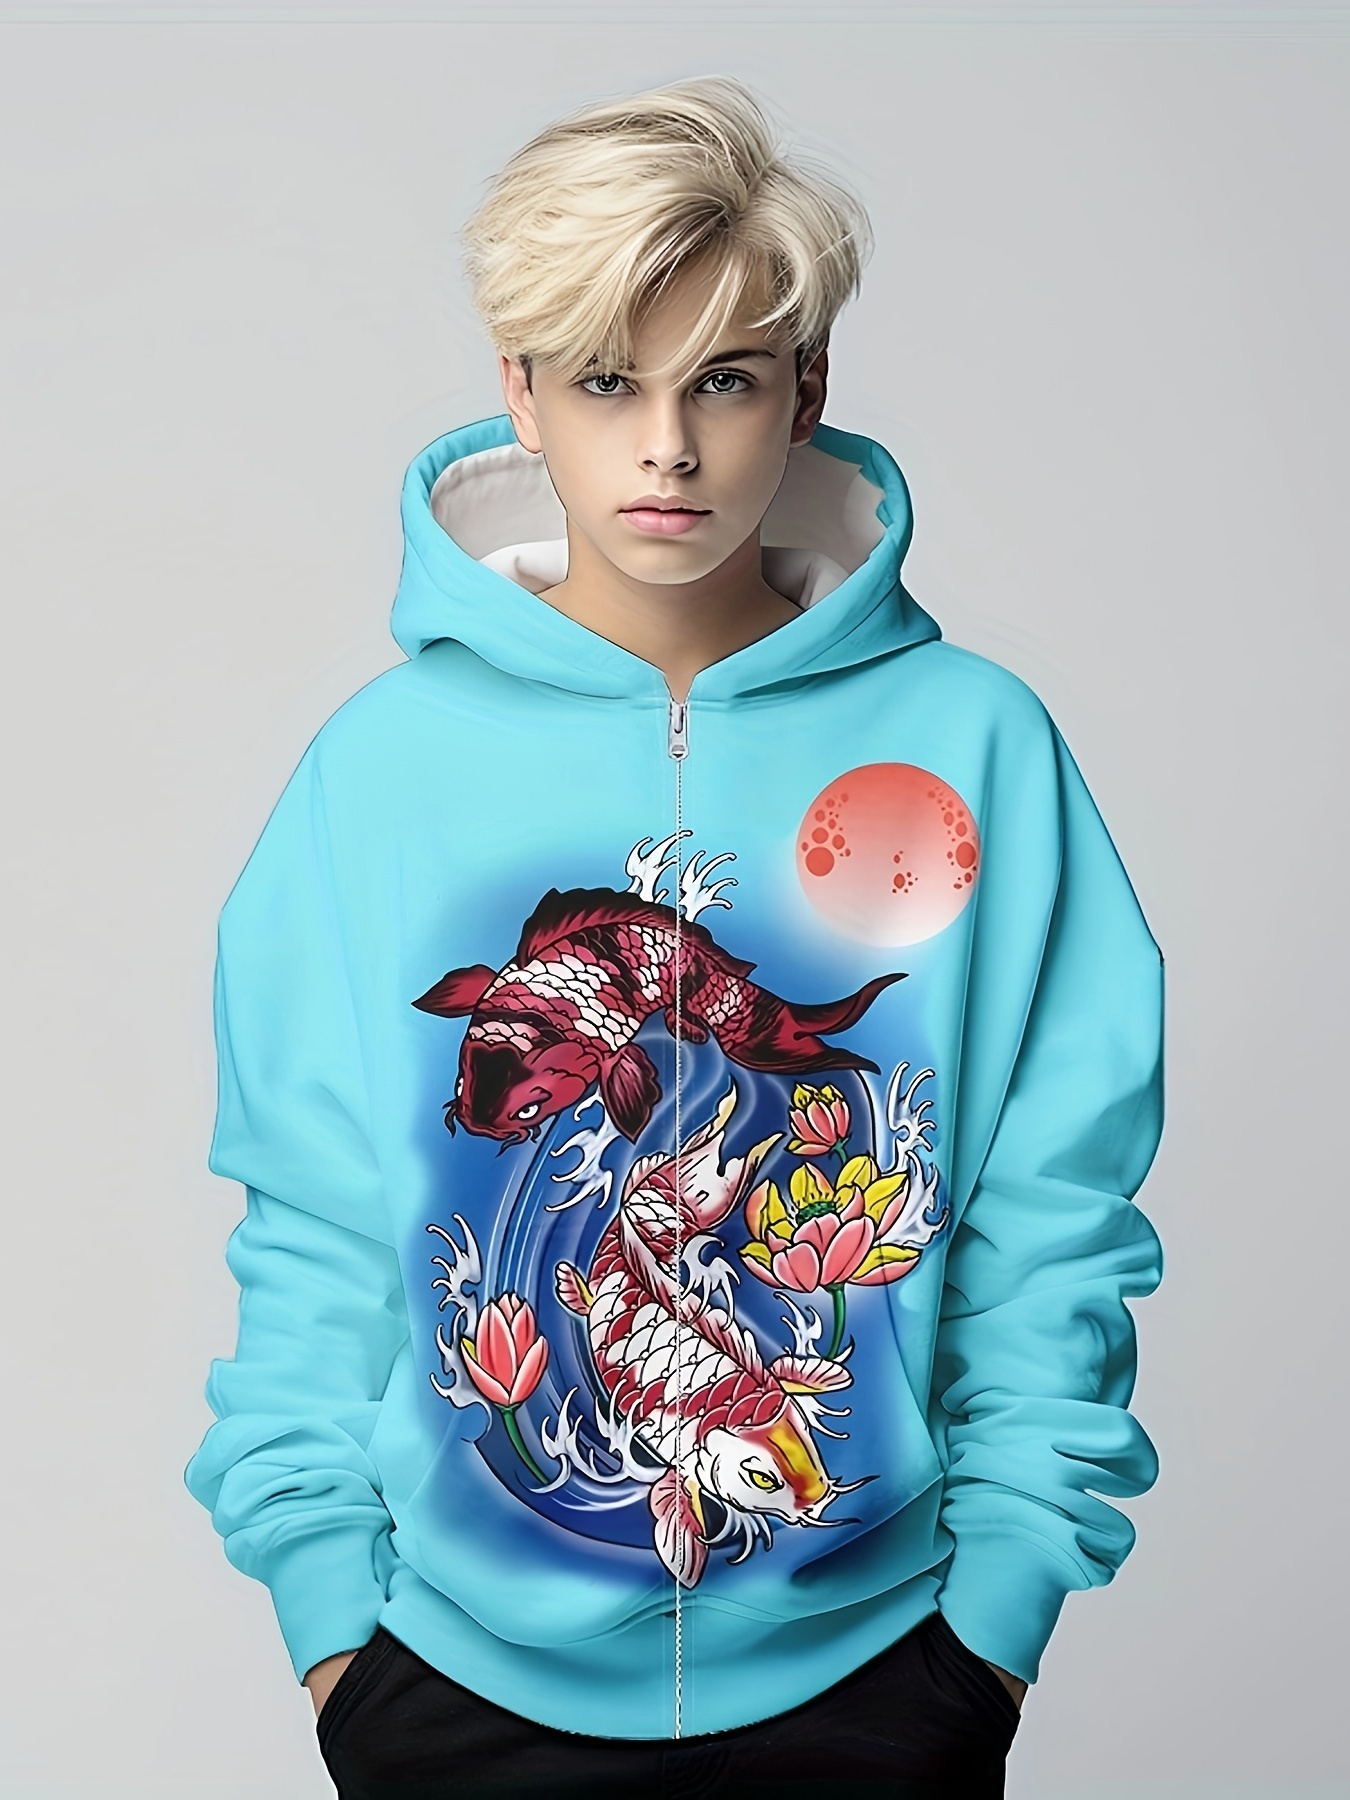 Fishes & Lake Pattern Hooded Jacket for Kids, Zipper Hoodie for Outdoor, Boy's Novelty Clothes for Spring Fall,Sky Blue,$11.39,140,Temu